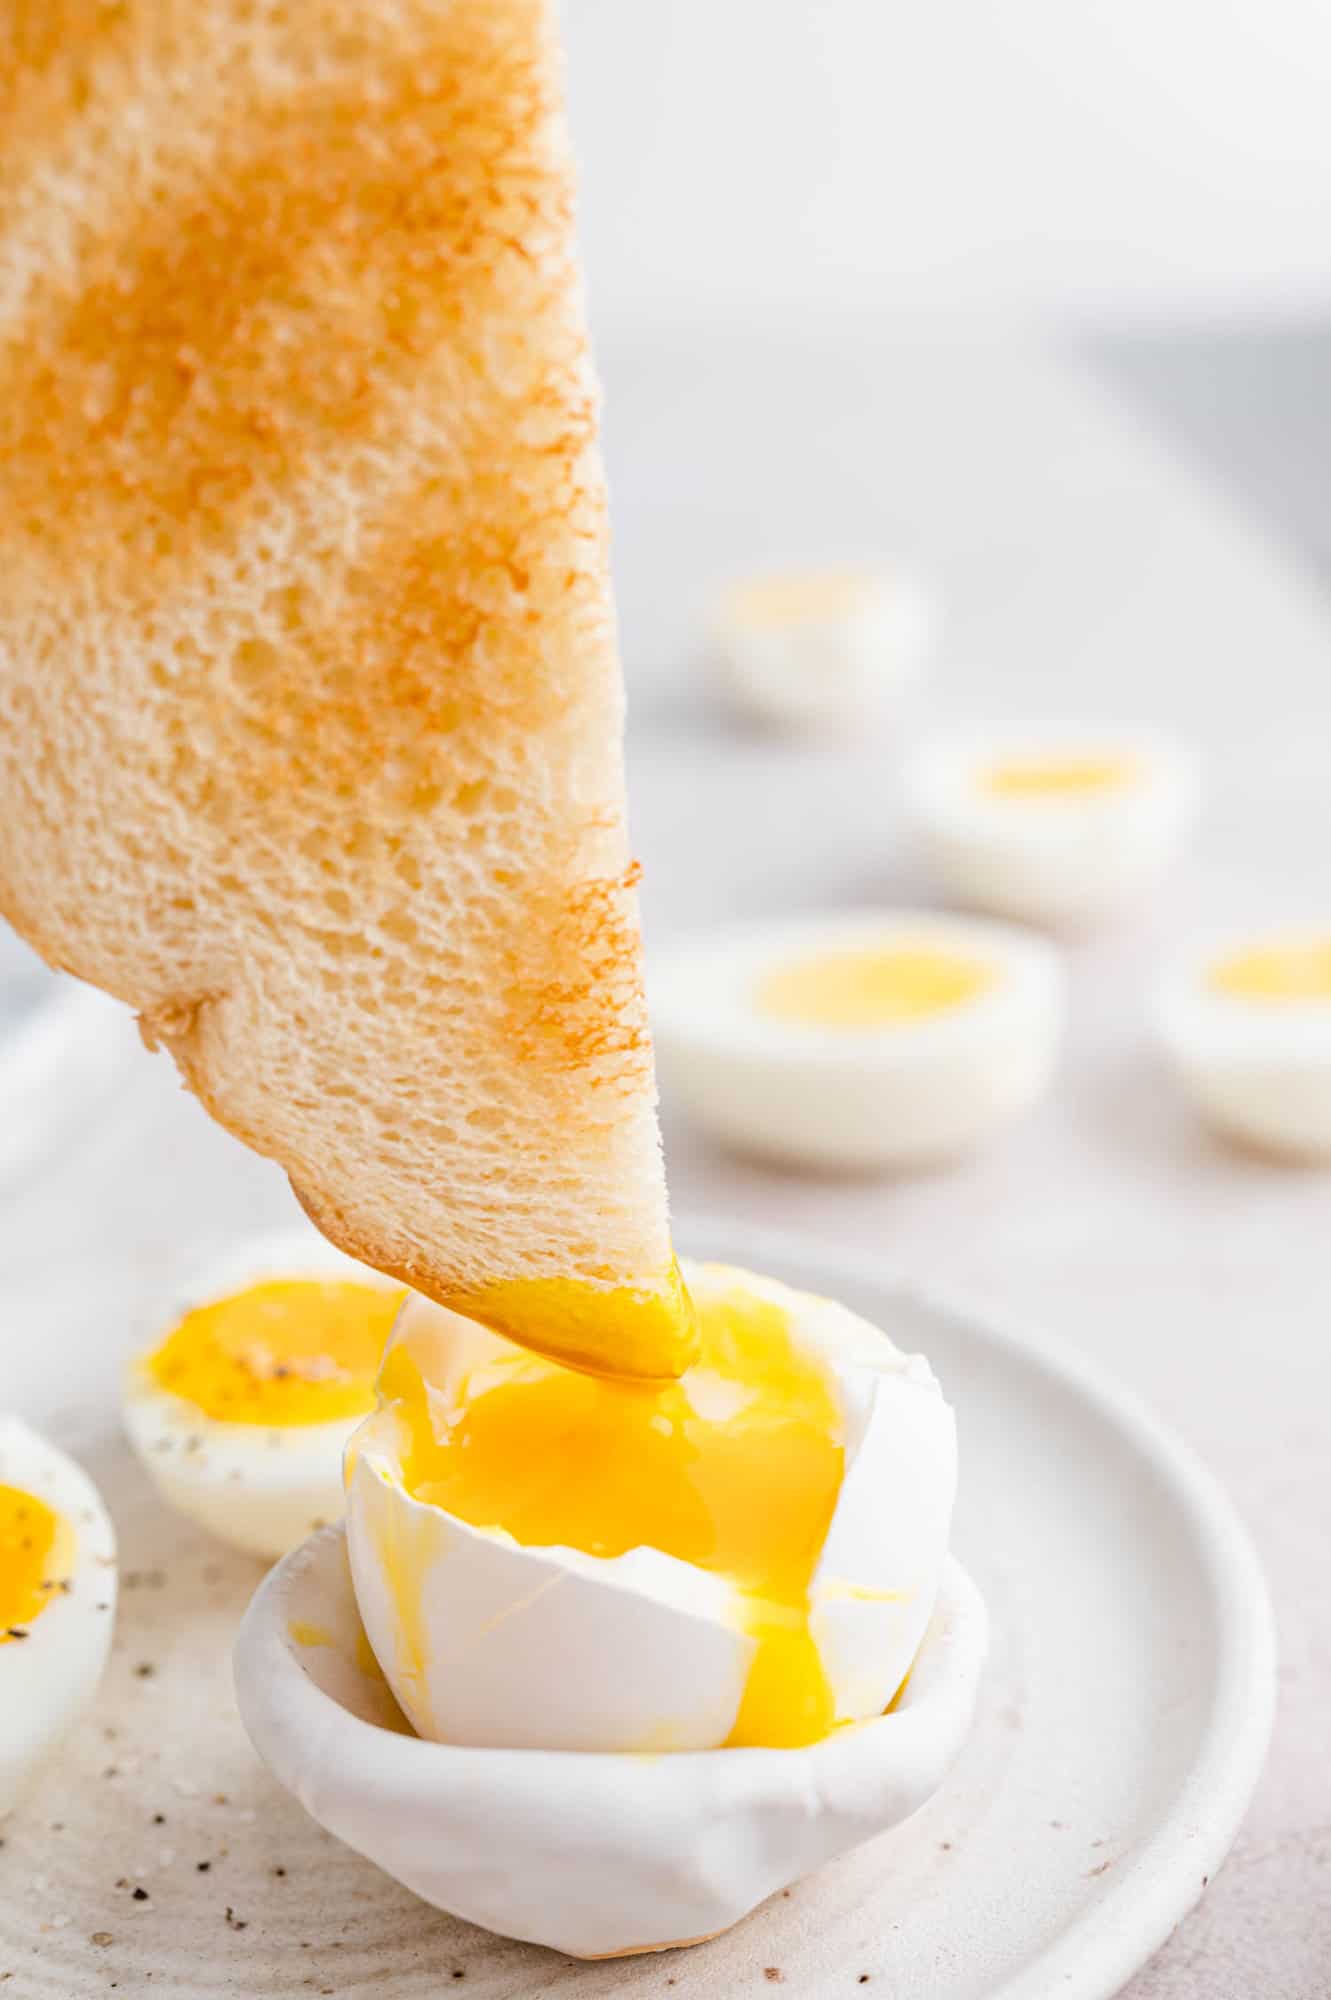 The corner of a piece of toast is dipped into one half of a soft boiled egg on a plate.